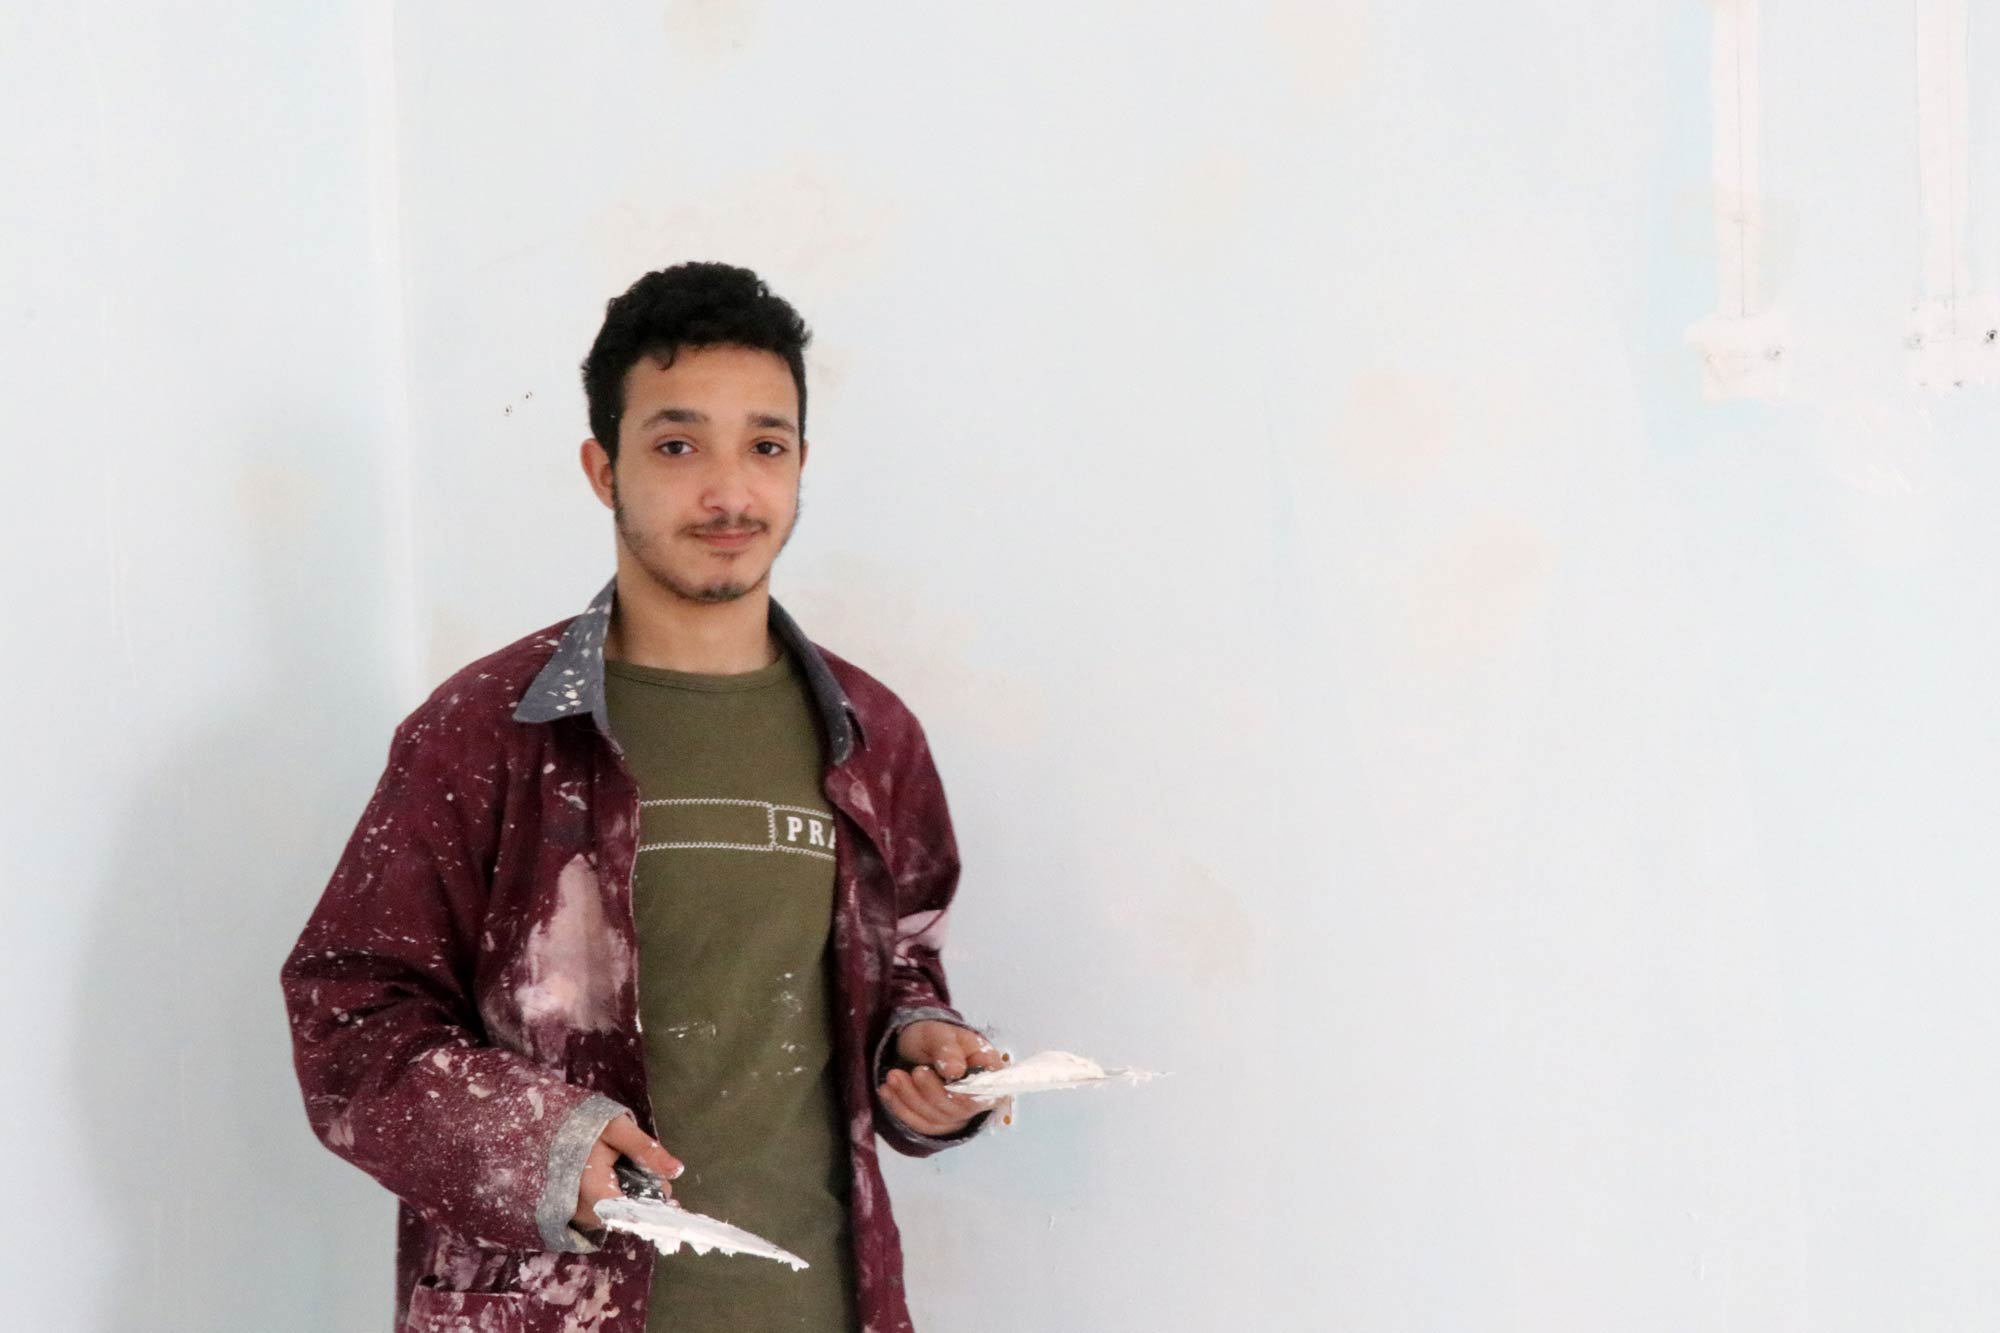 Mohammad is a student in the advanced commercial painting and plastering course.